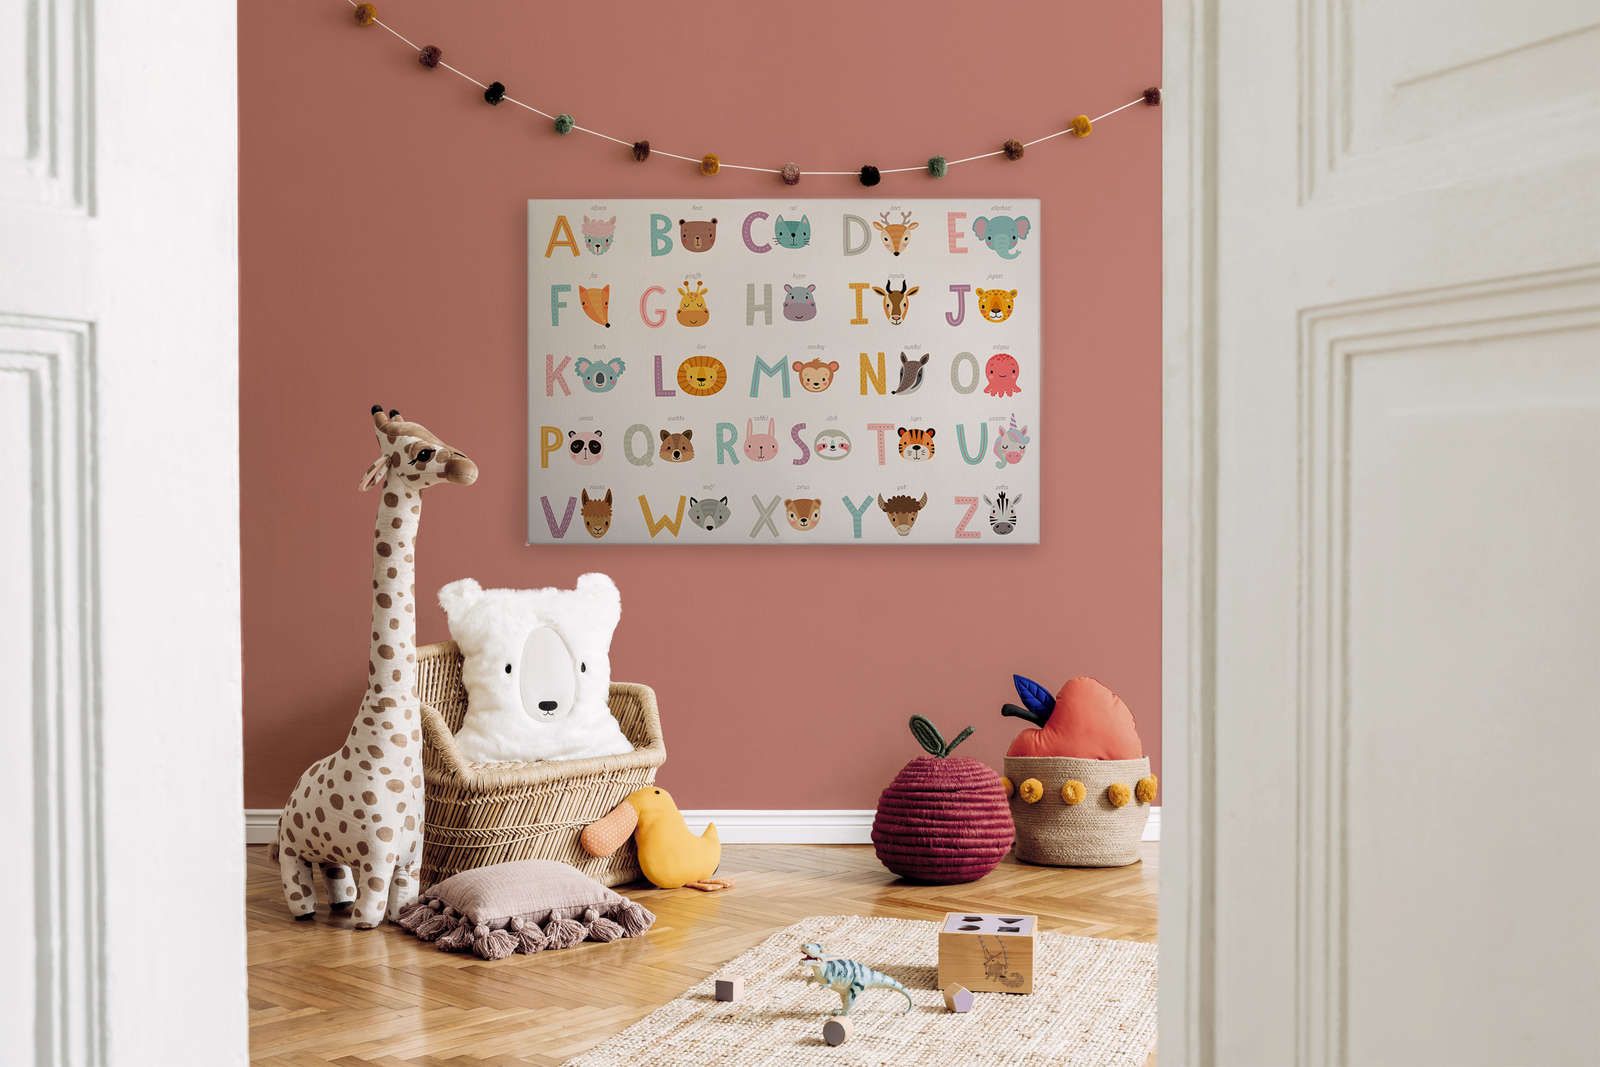             Canvas ABC with animals and animal names - 120 cm x 80 cm
        